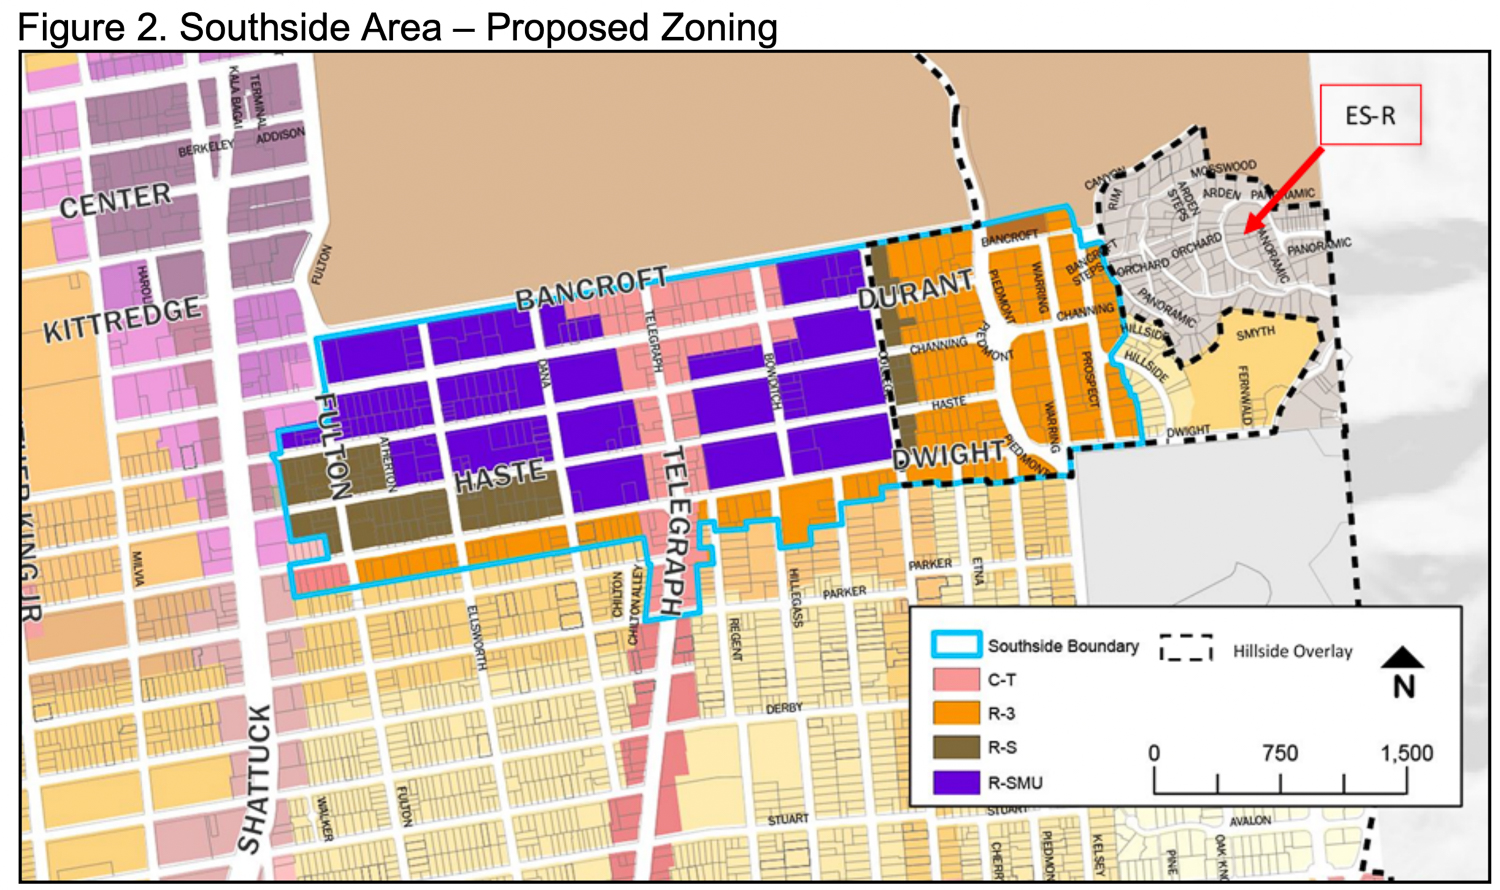 Southside proposed zoning map, image from City Council documents